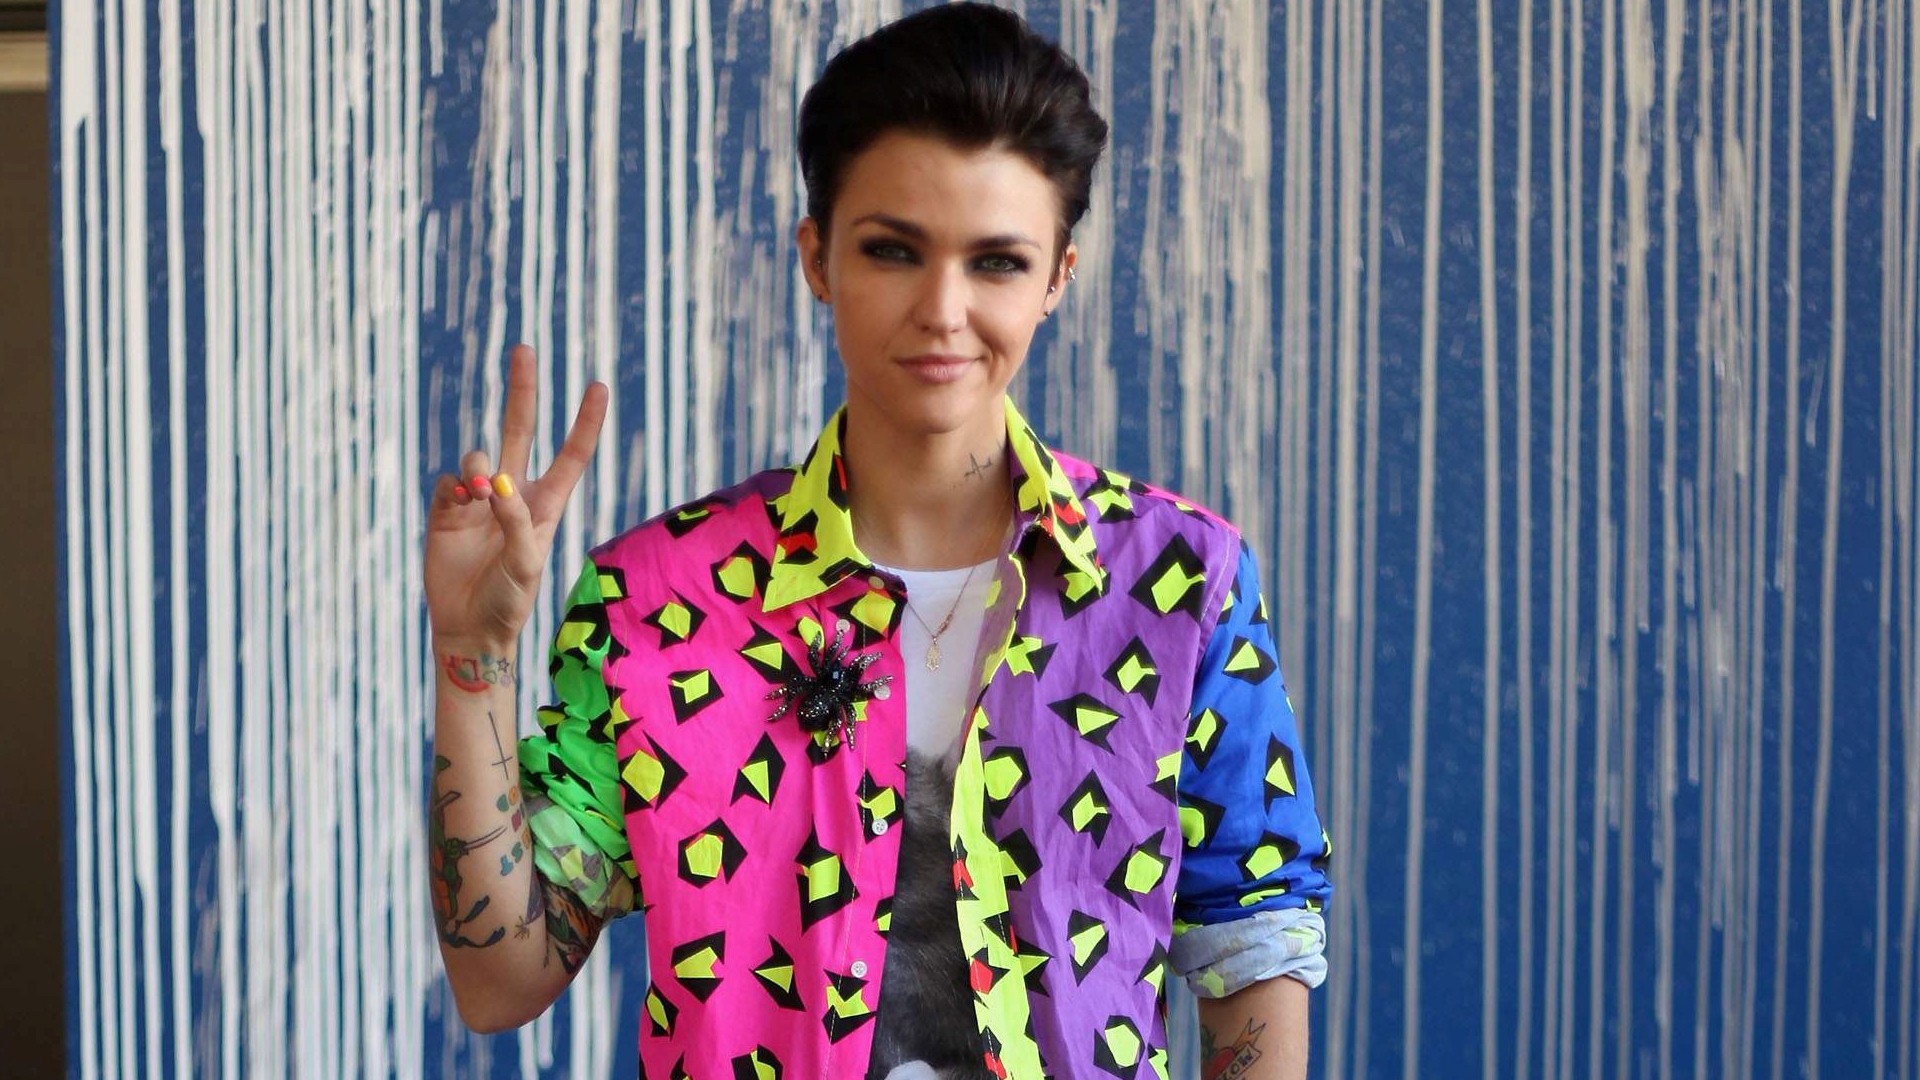 Hd Photo Background Of Ruby Rose - Ruby Rose As Tomboy - HD Wallpaper 